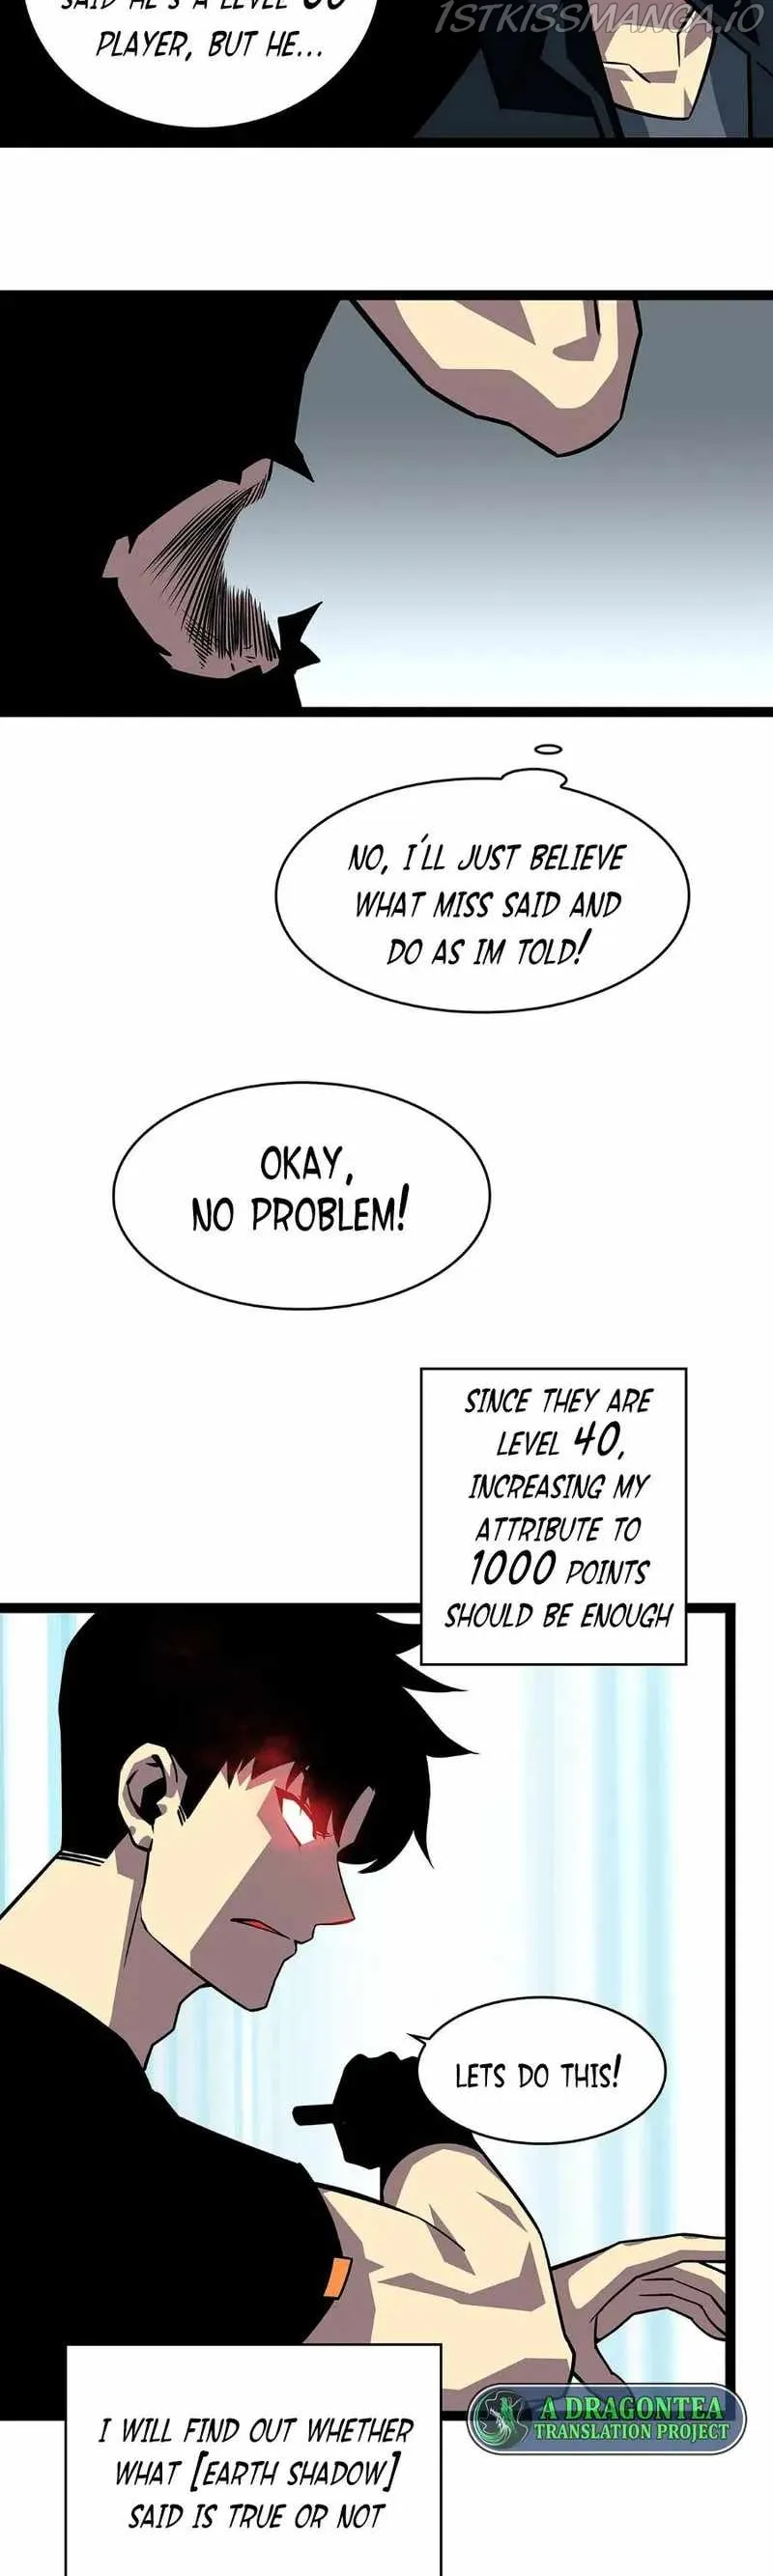 It  all starts with playing game seriously Chapter 108 page 20